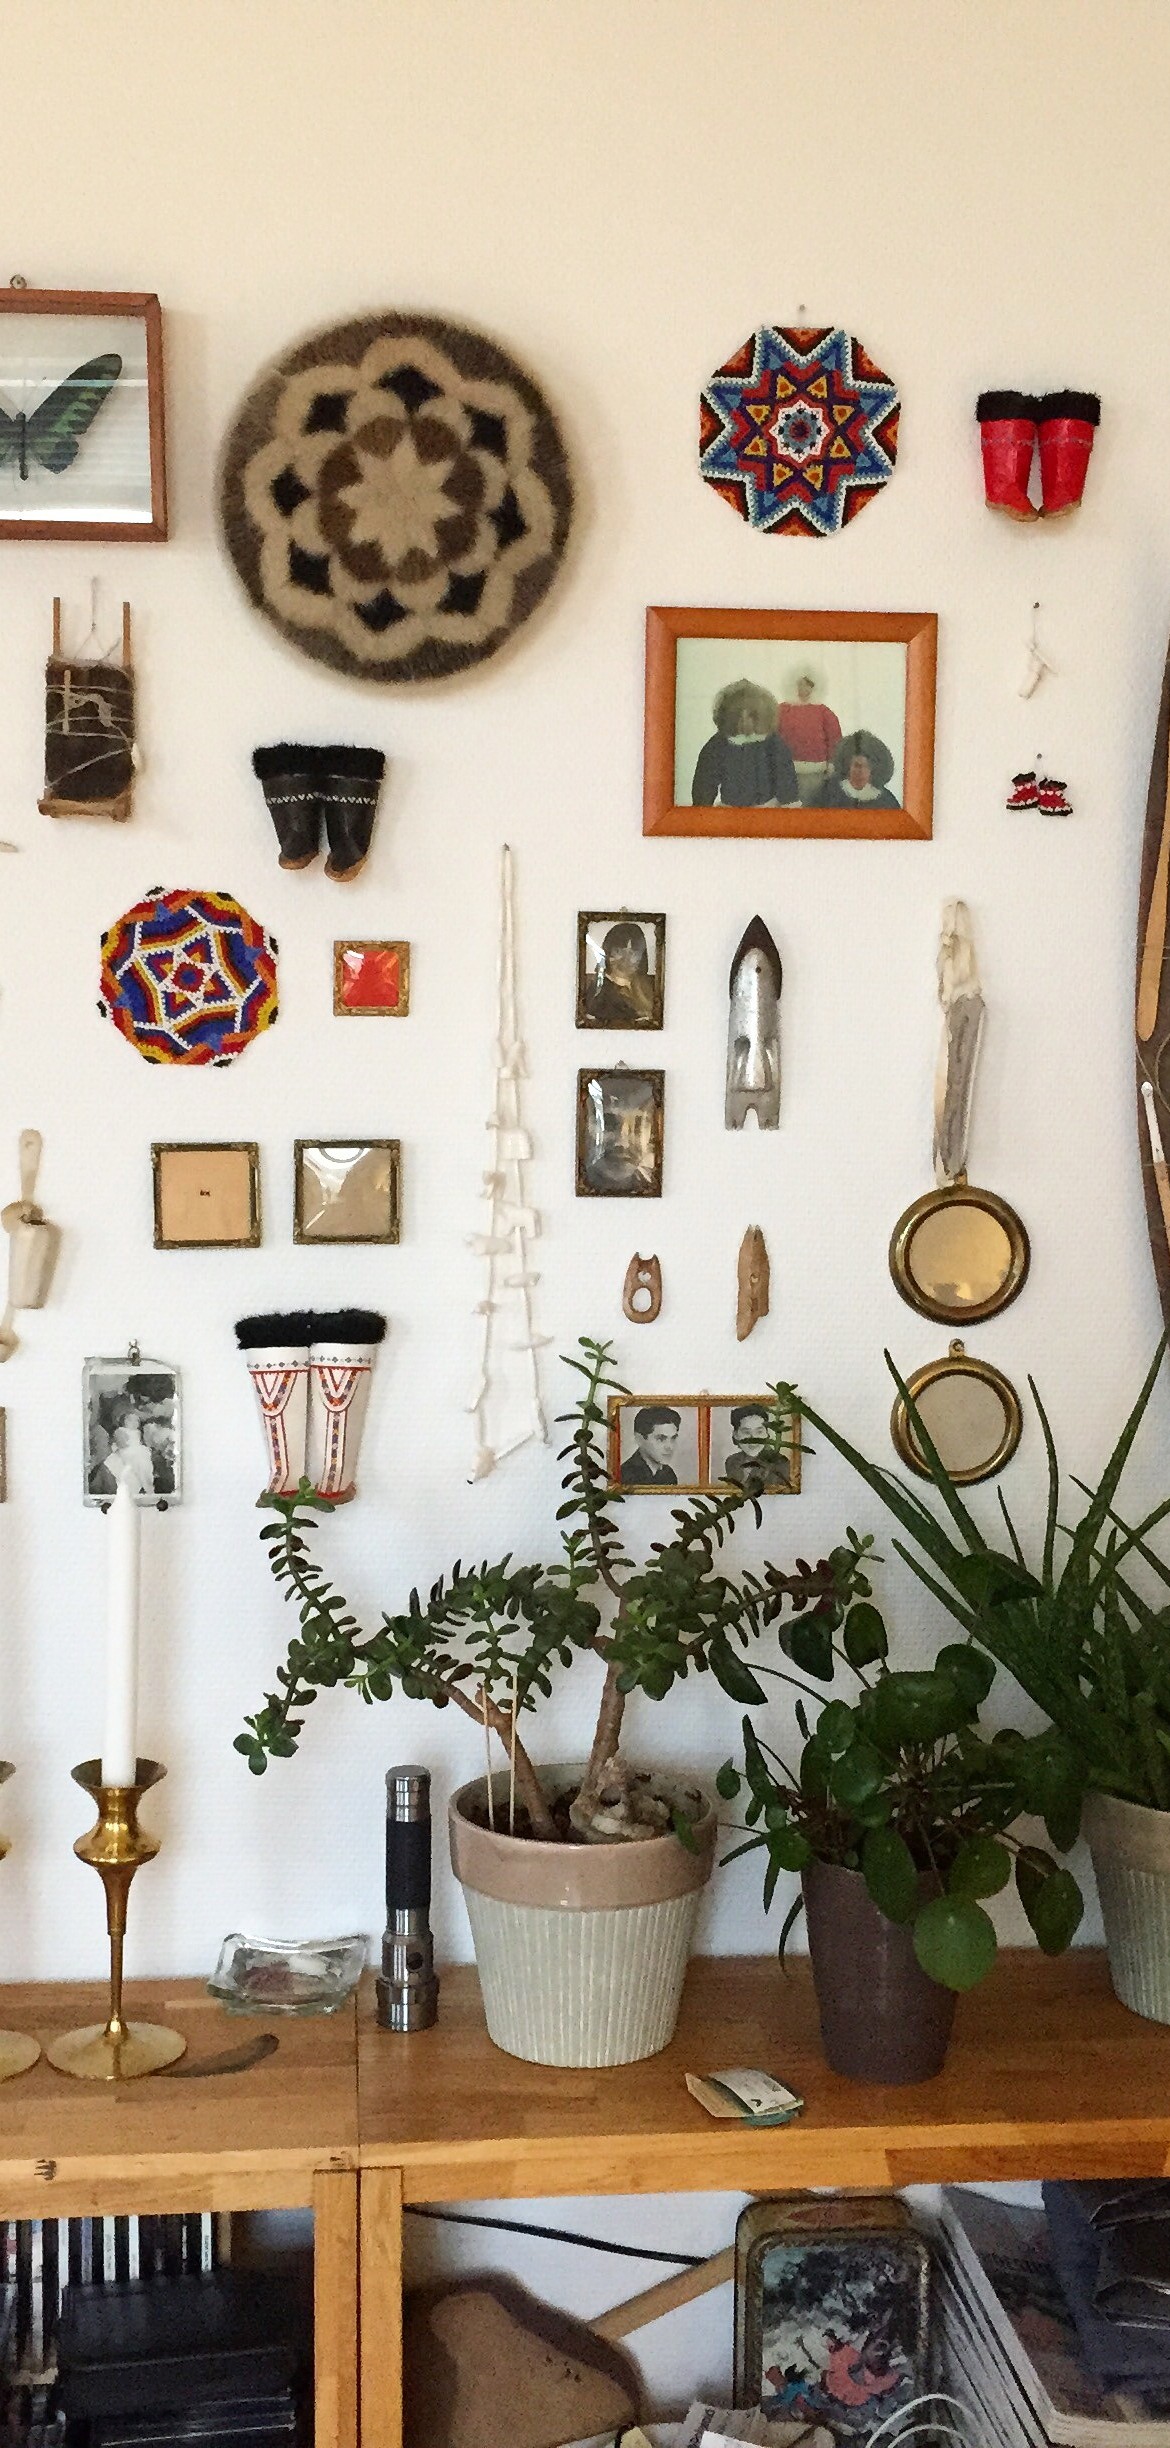 A wall displaying a medley of interesting objects.